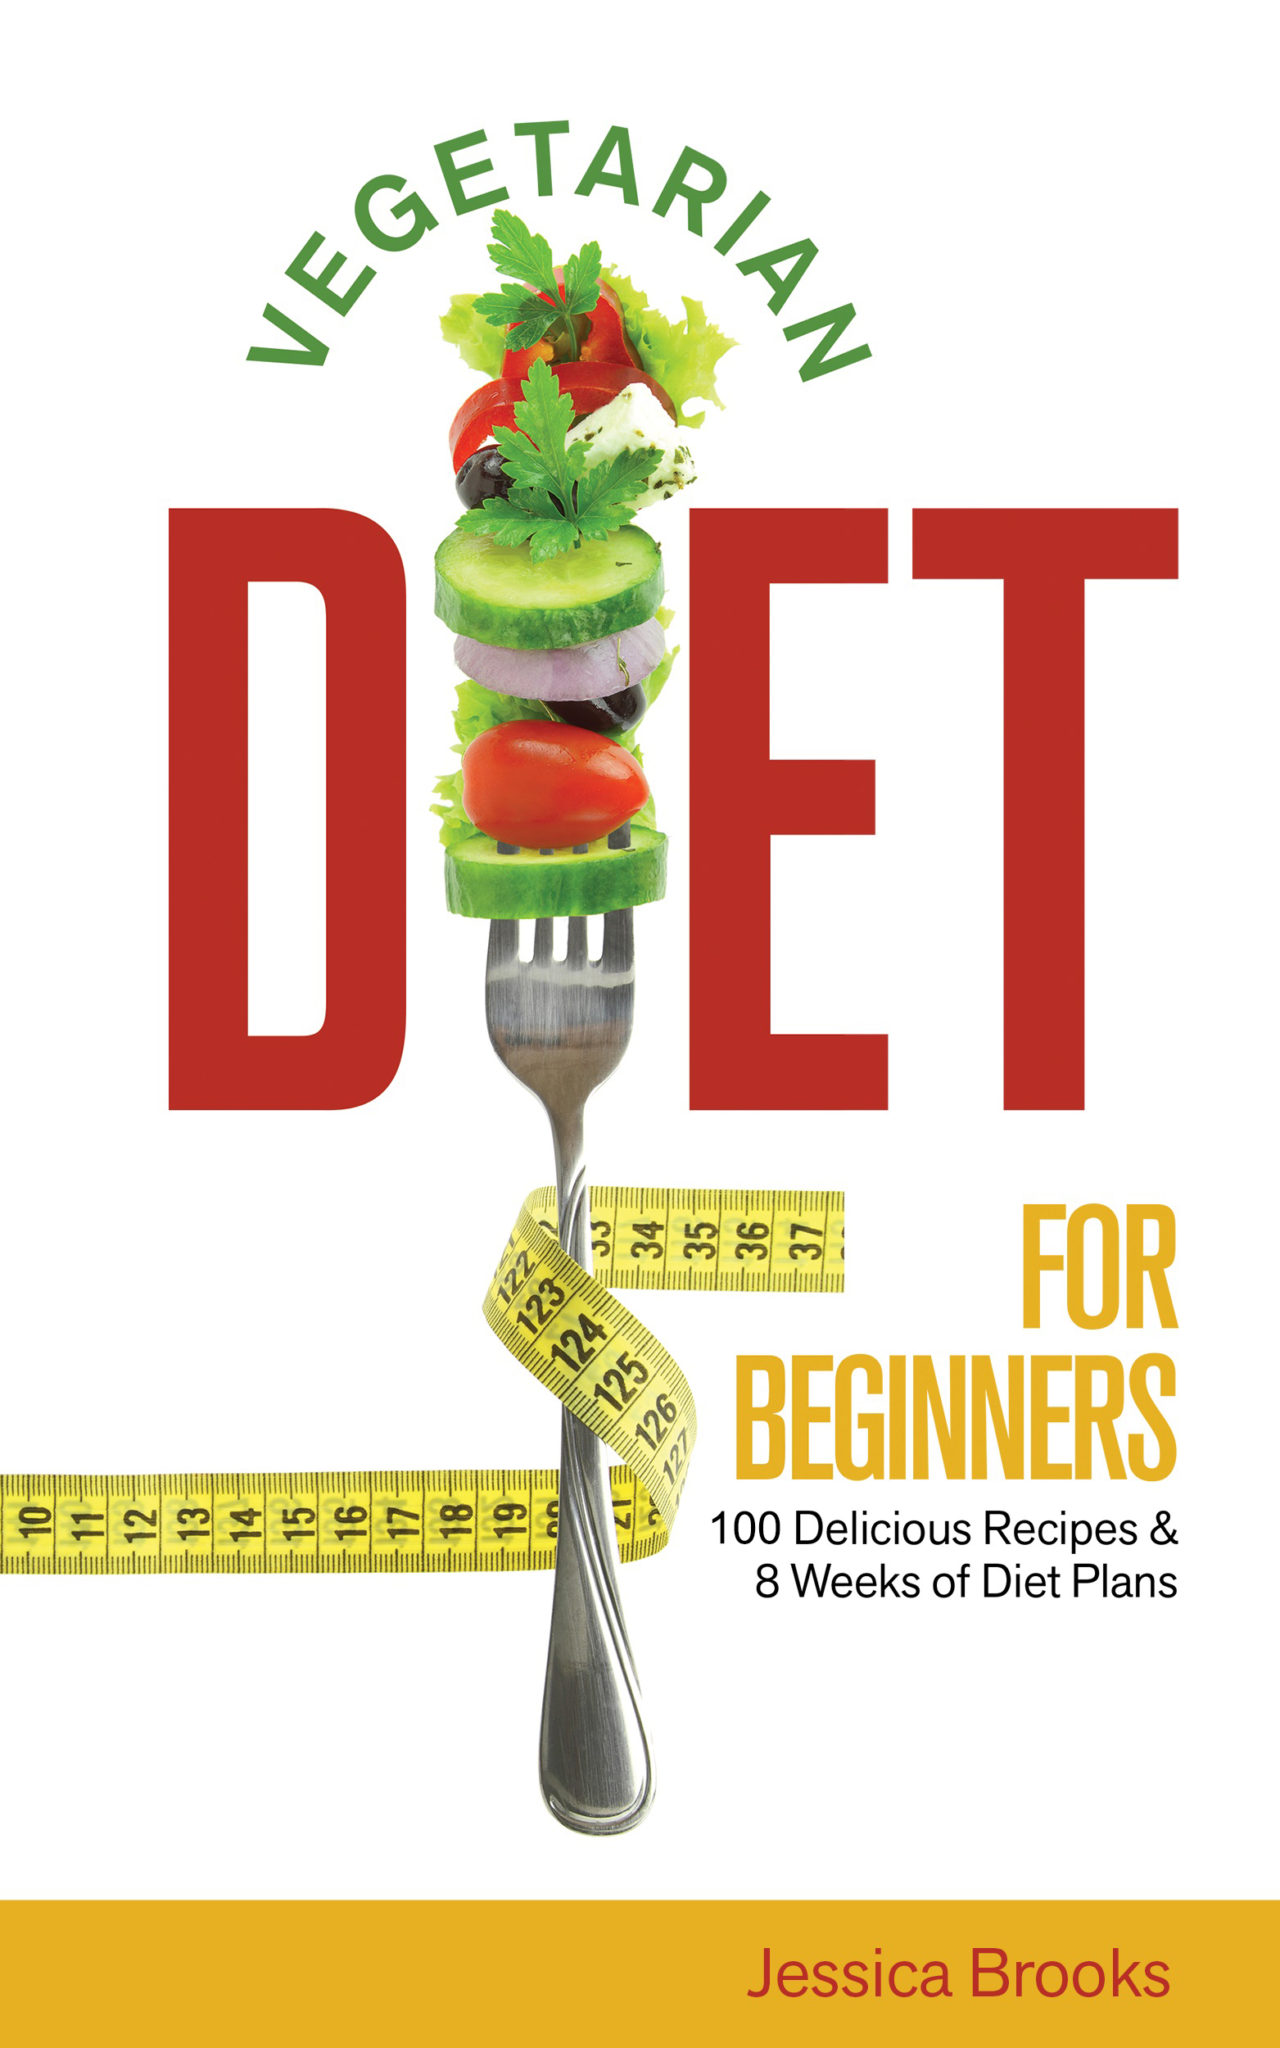 FREE: Vegetarian: Vegetarian Diet For Beginners 100 Delicious Recipes And 8 Weeks Of Diet Plans by Jessica Brooks